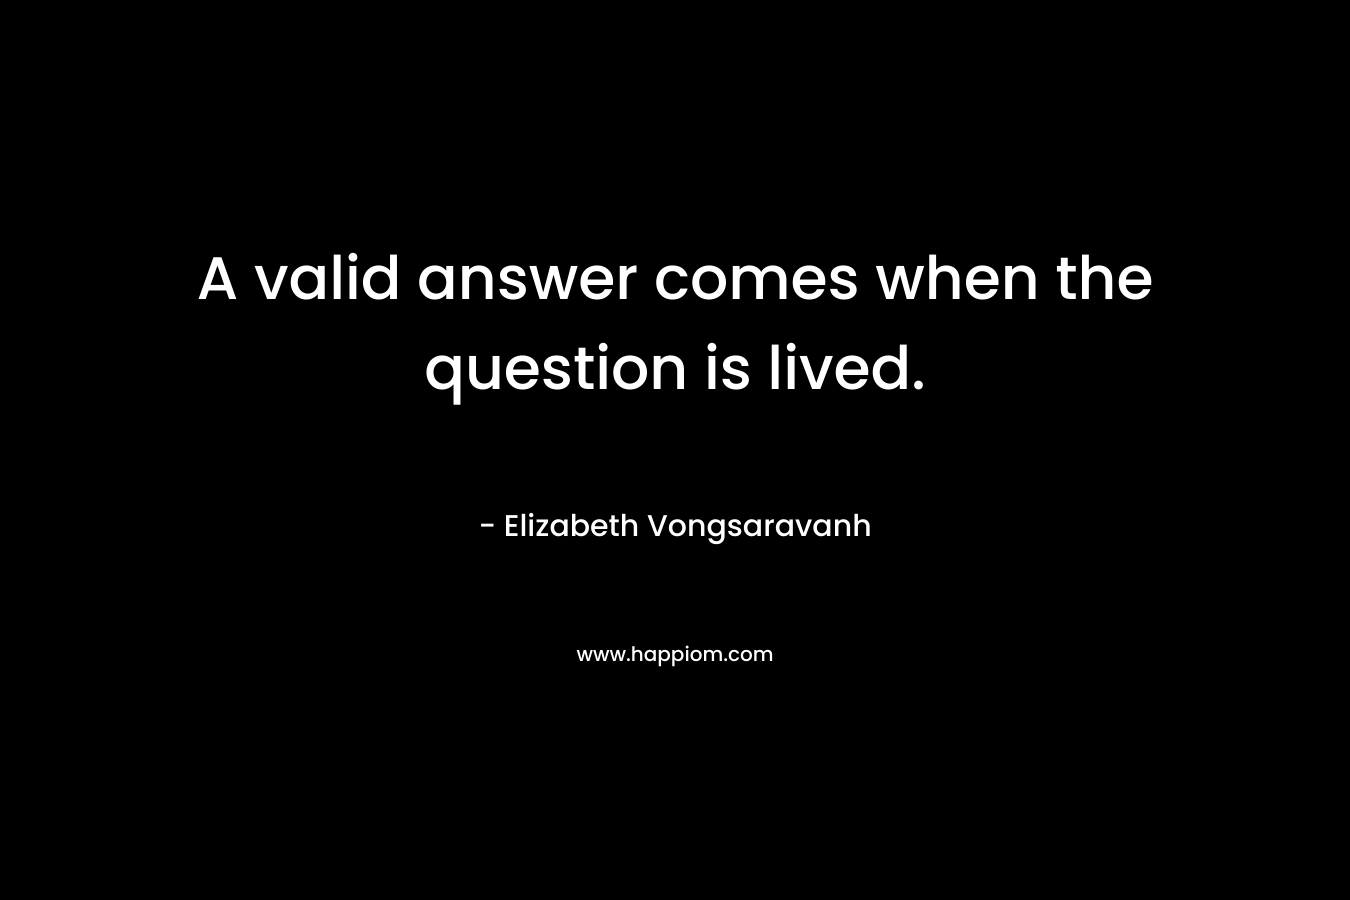 A valid answer comes when the question is lived. – Elizabeth Vongsaravanh